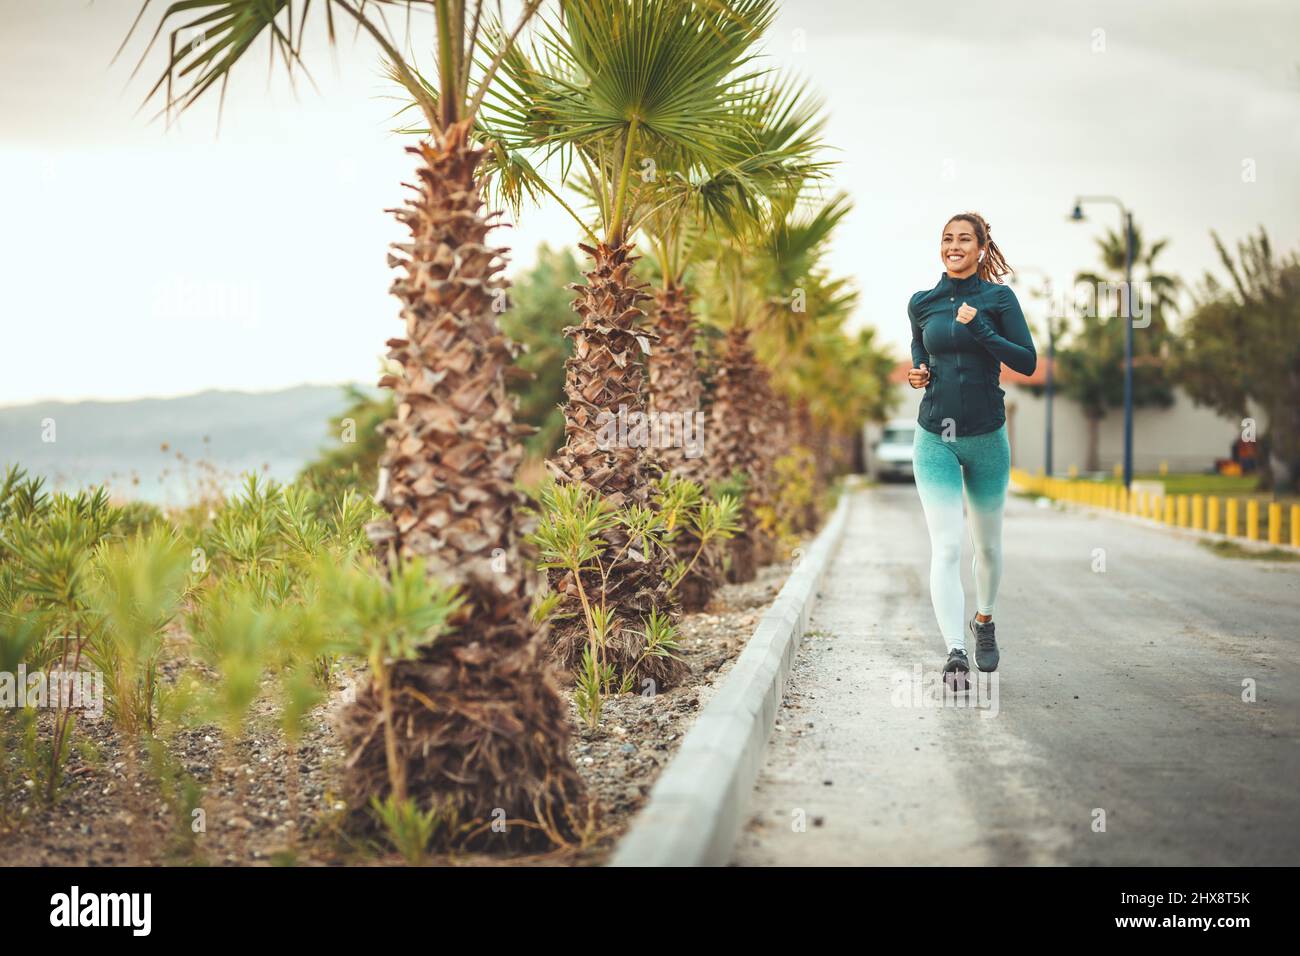 A beautiful woman is running along the path of a Mediterranean town by the sea and enjoying in summer sunny day. Stock Photo